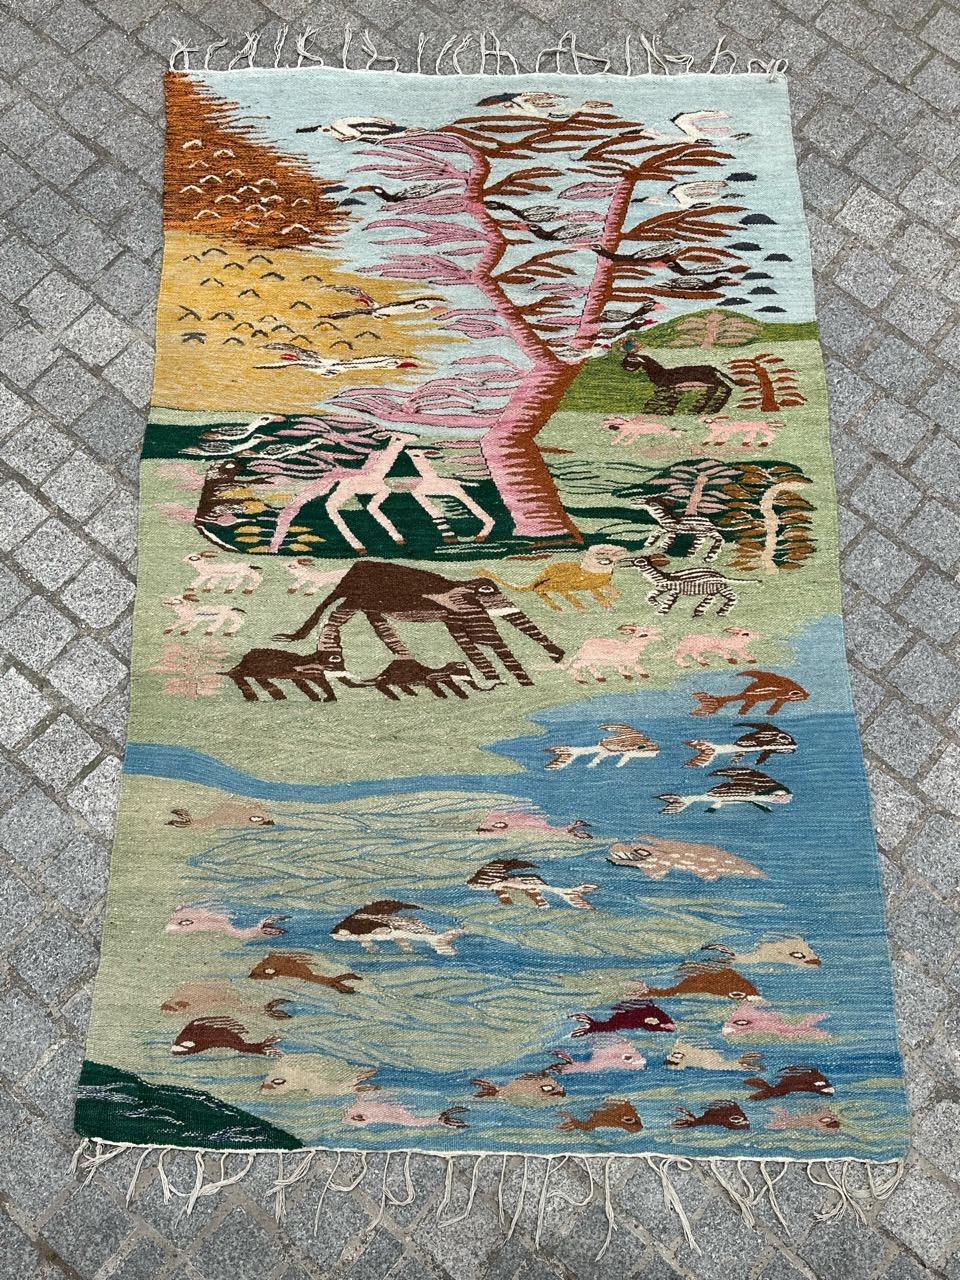 Exquisite midcentury Egyptian tapestry, inspired by the Ramsès Wissa Wassef School Tapestries. Featuring a stunning nature-themed design with animals, birds, and fish, adorned with vibrant colors. Handwoven entirely with wool on a cotton foundation.